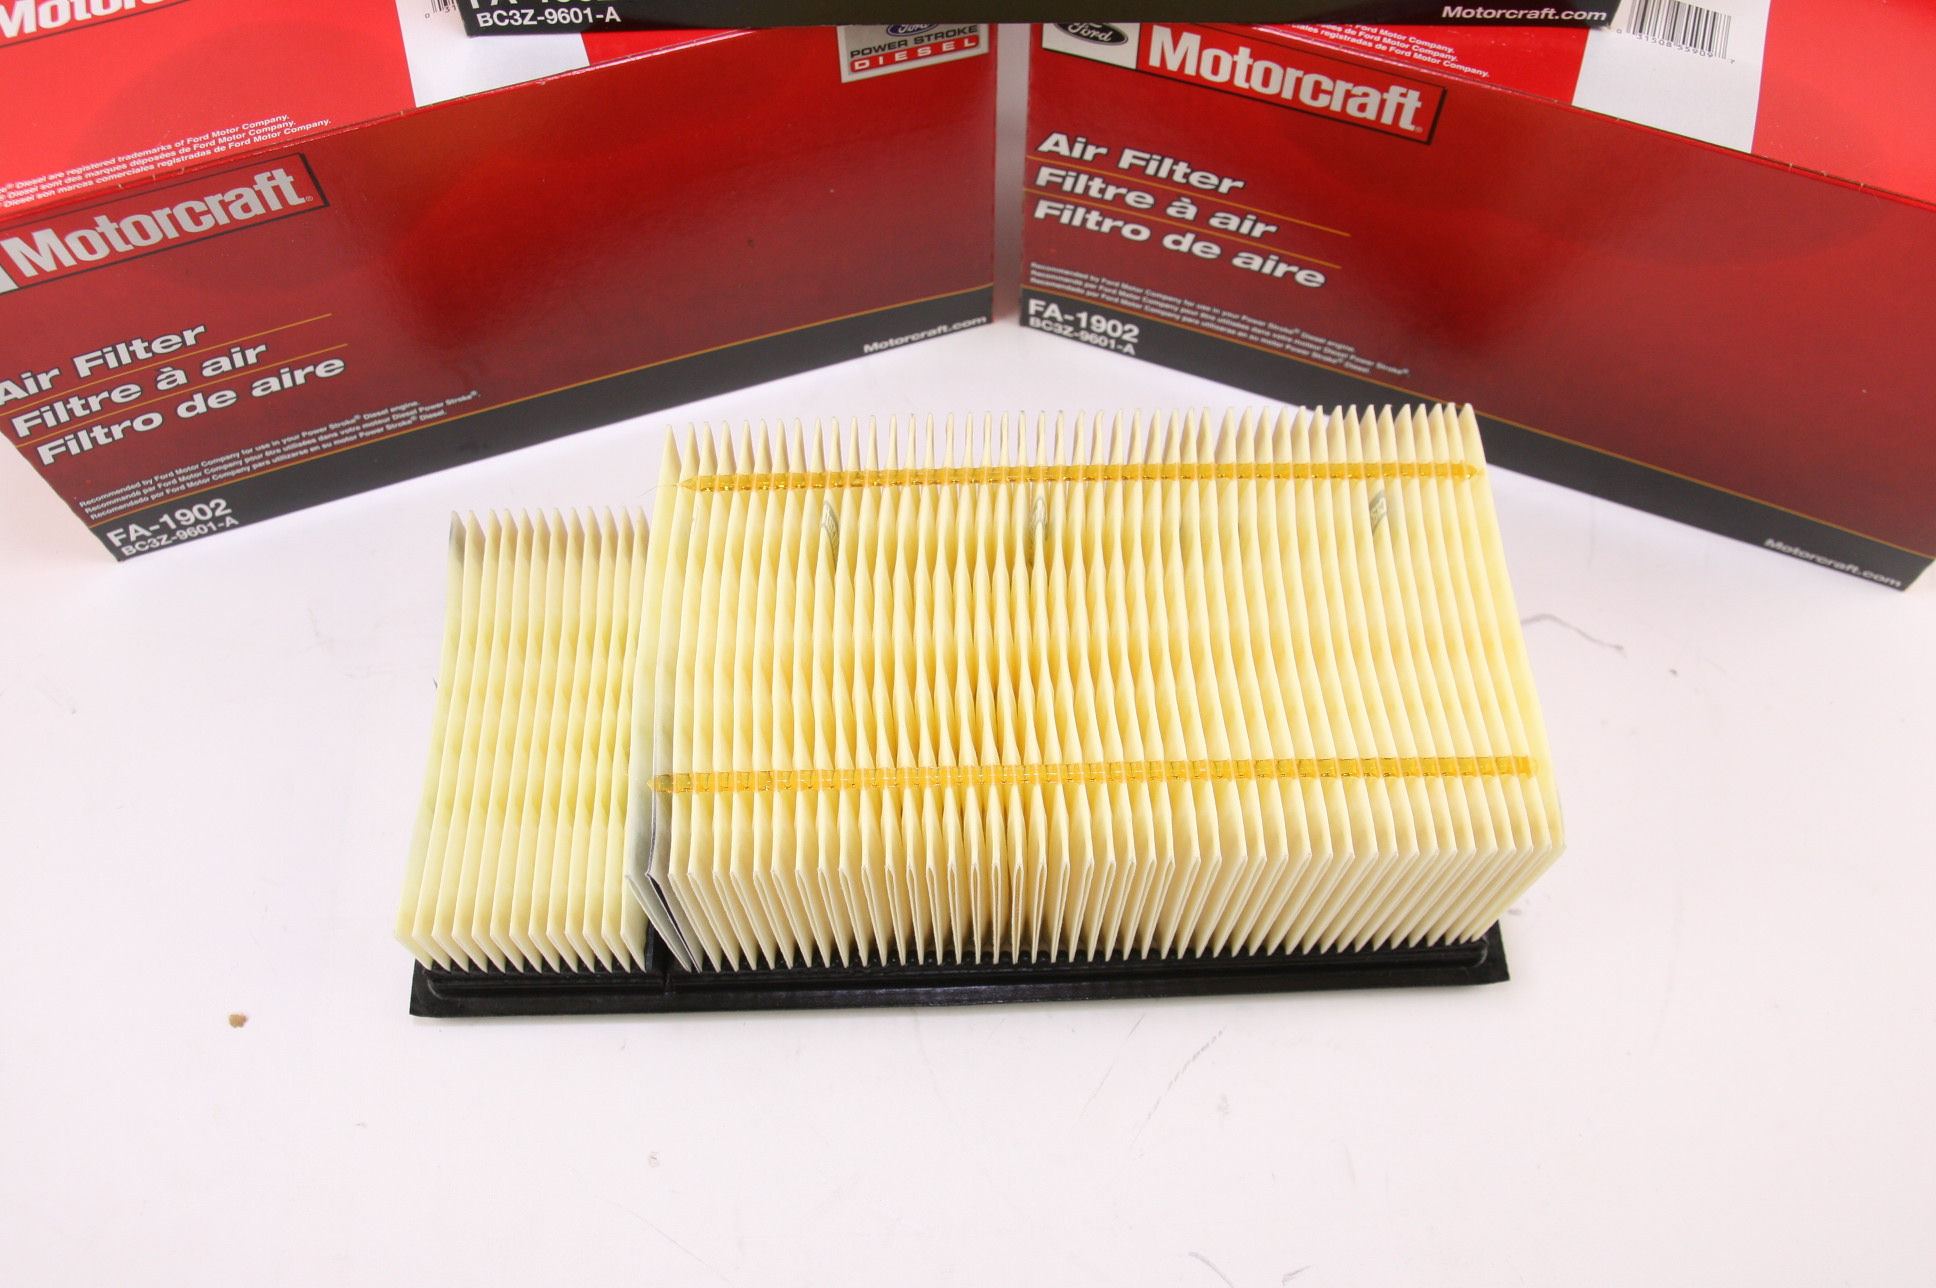 Set of 3 OEM Motorcraft FA1902 Ford BC3Z9601A 6.7L Powerstroke Diesel Air Filter - image 6